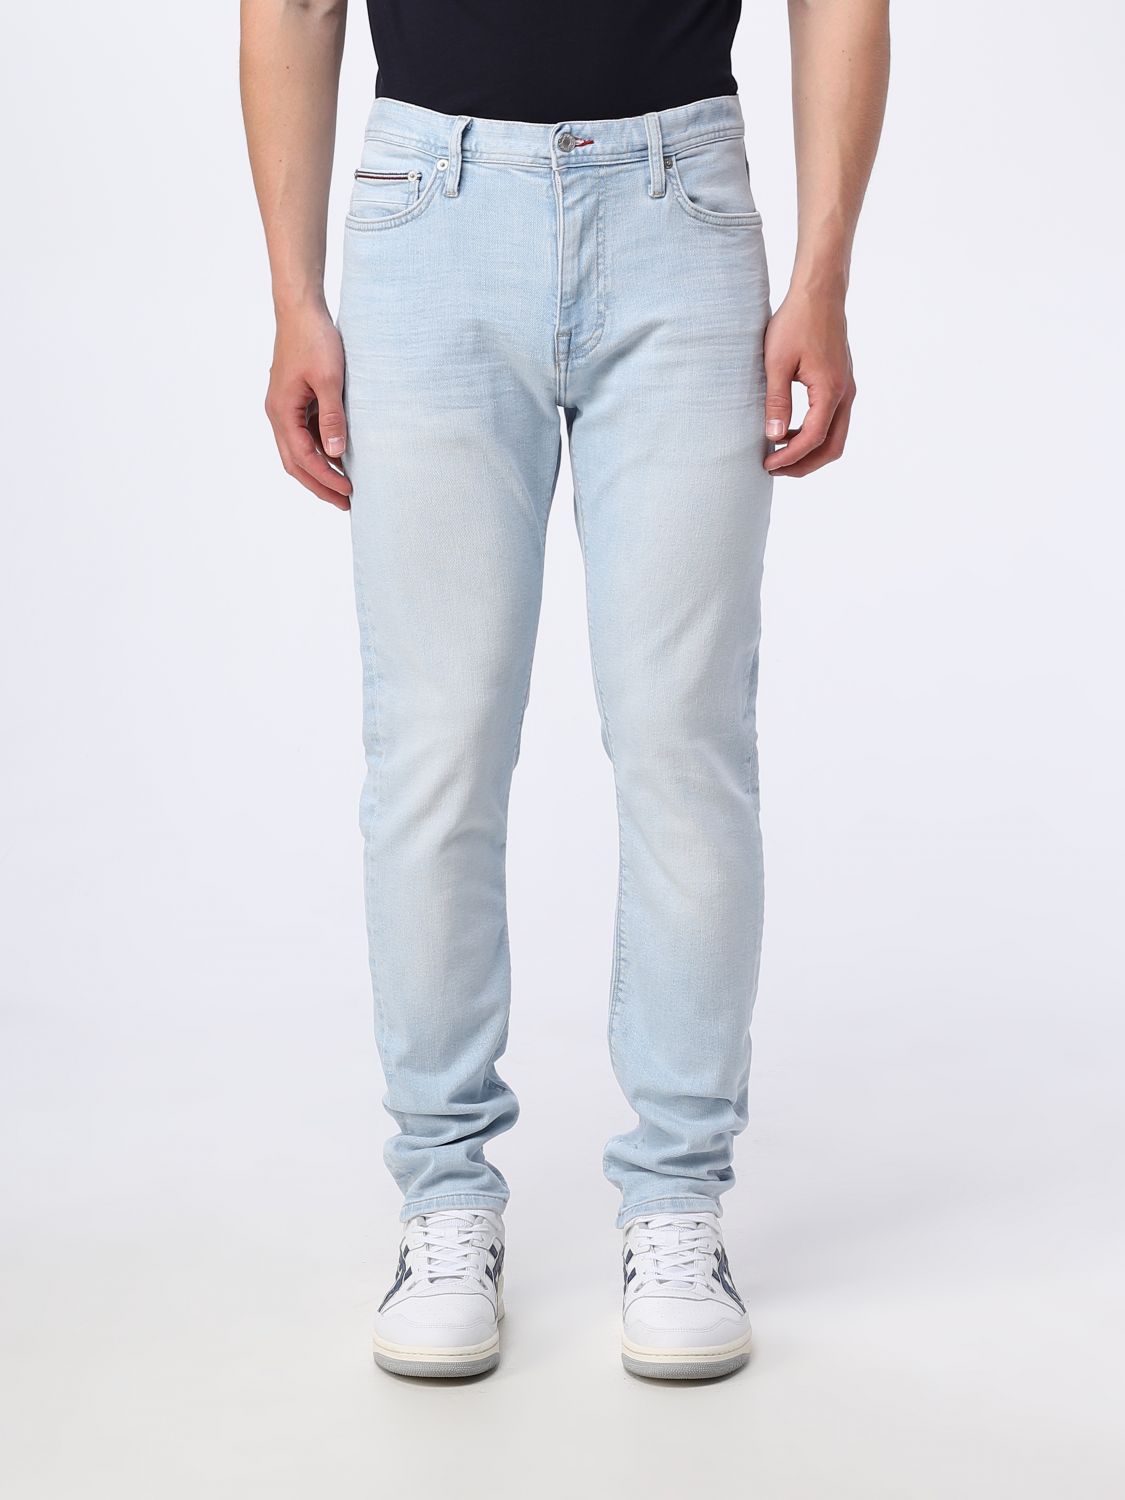 TOMMY HILFIGER: jeans for - Stone Washed | Tommy Hilfiger jeans MW0MW31099 online at GIGLIO.COM